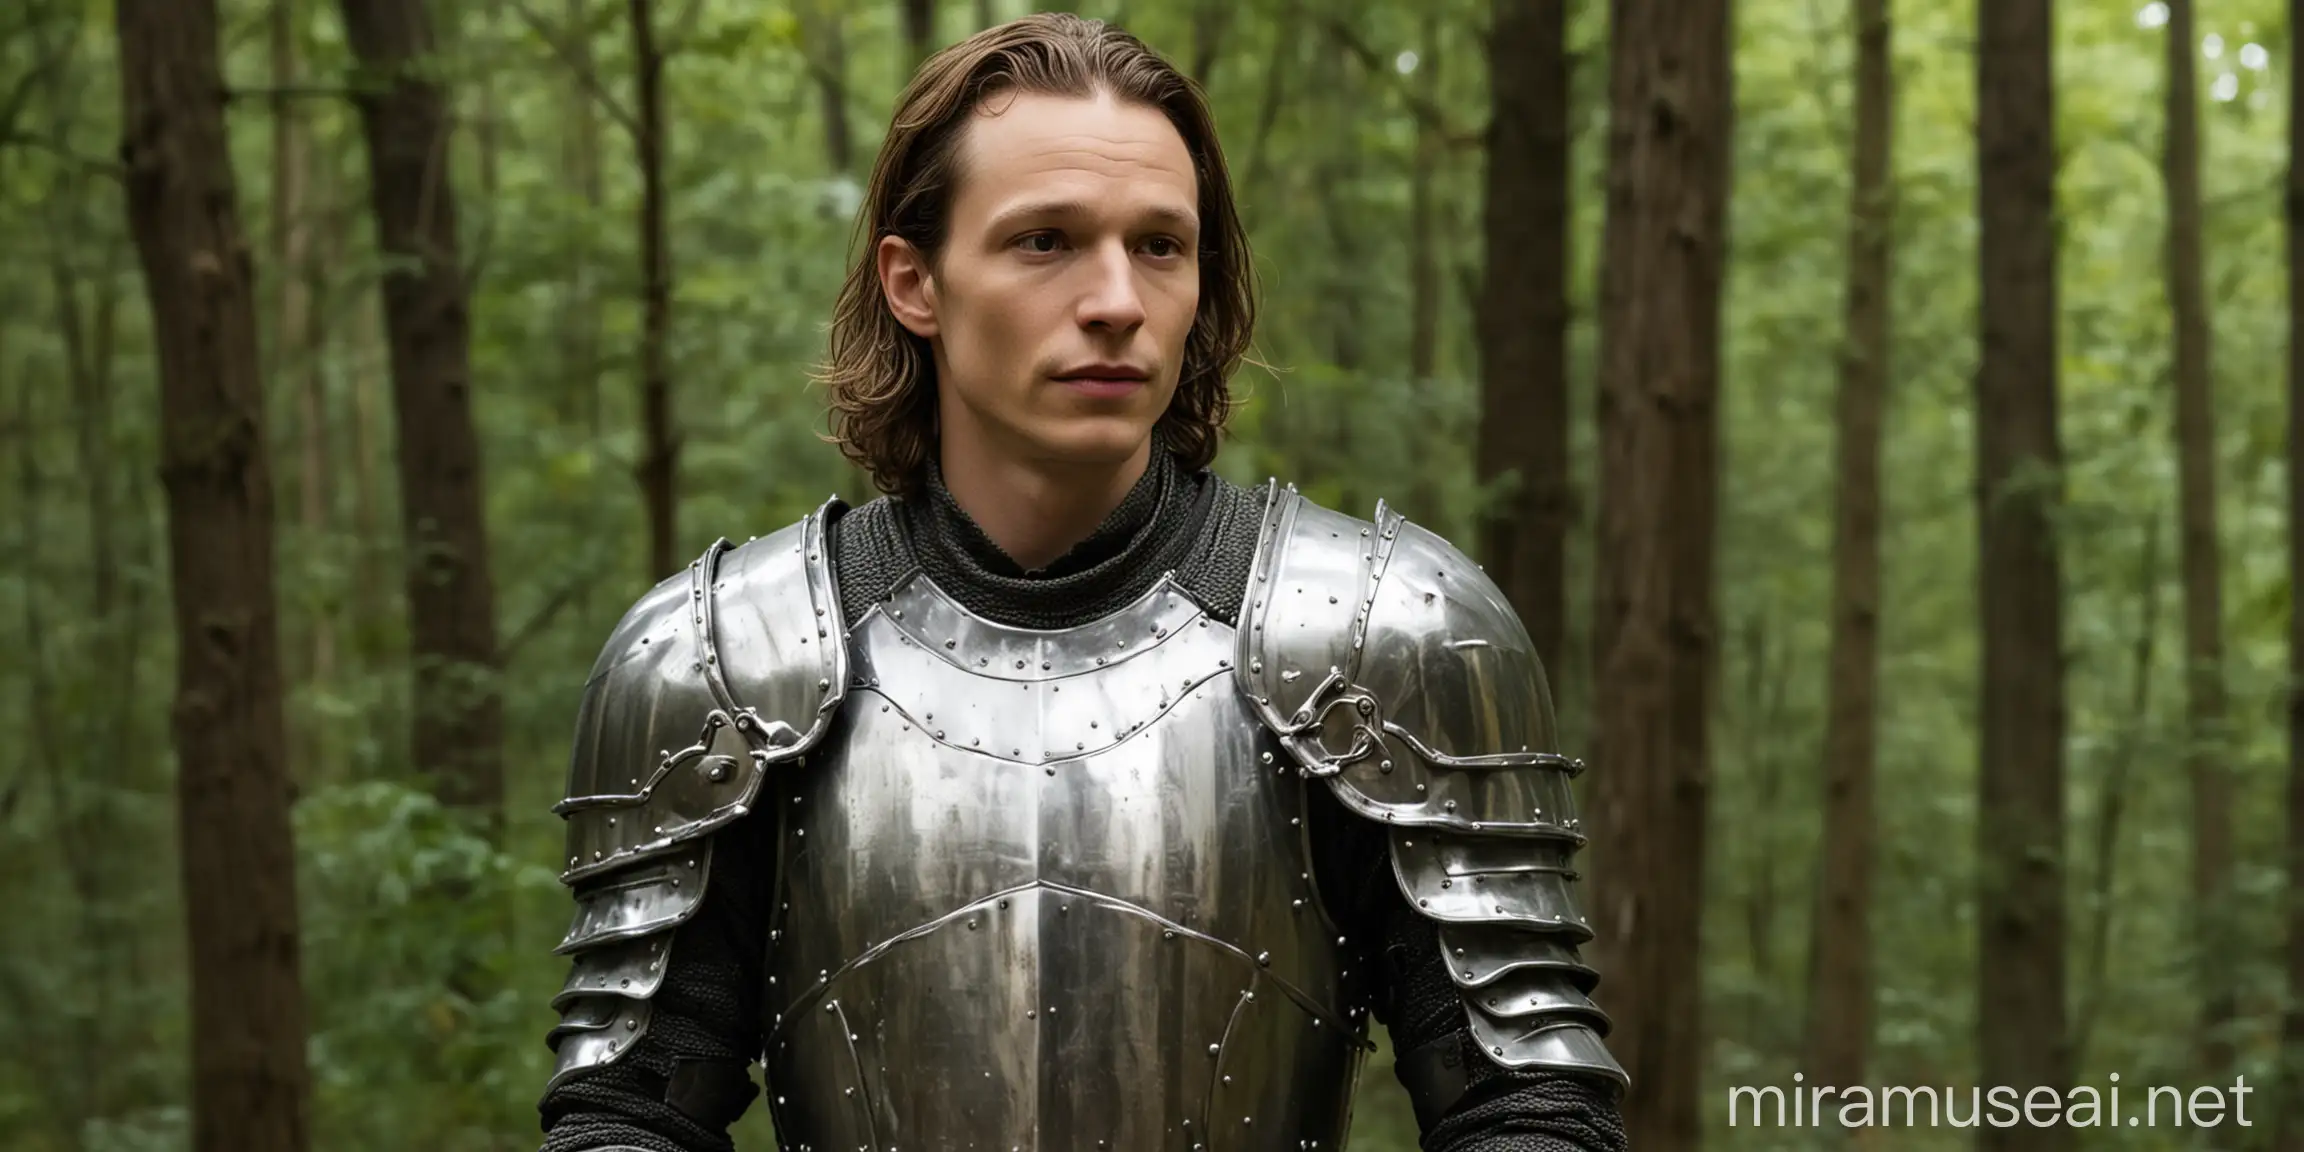 Handsome Actor Mike Faist wearing a suit of knightly armor in a forrest background